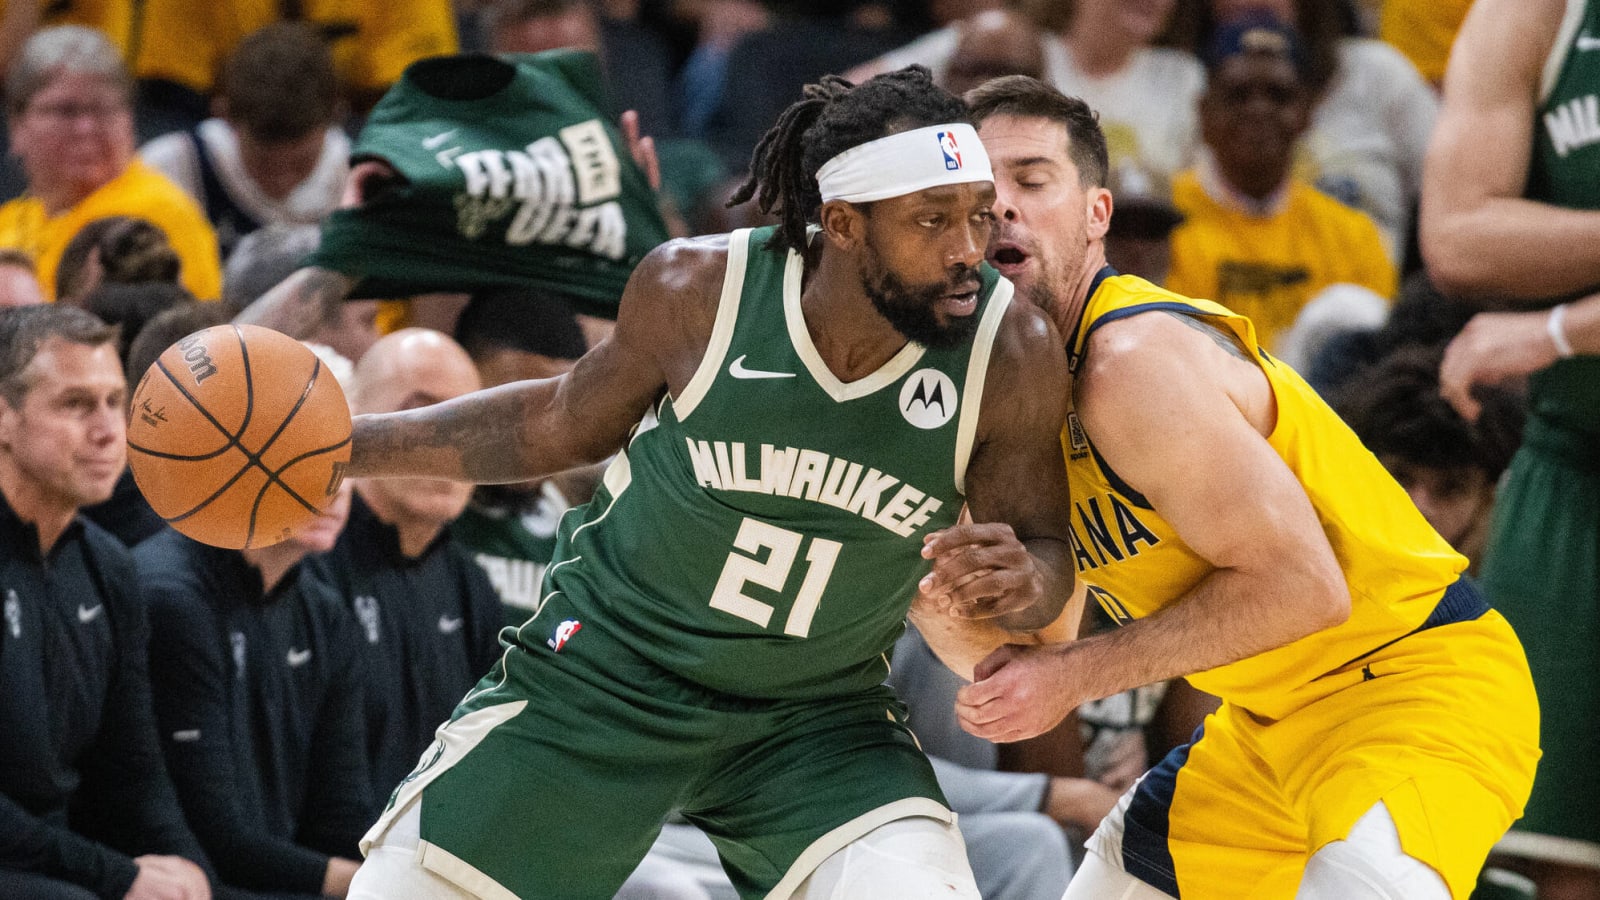 Police Investigate Milwaukee Bucks Guard After Controversial Game 6 Incident